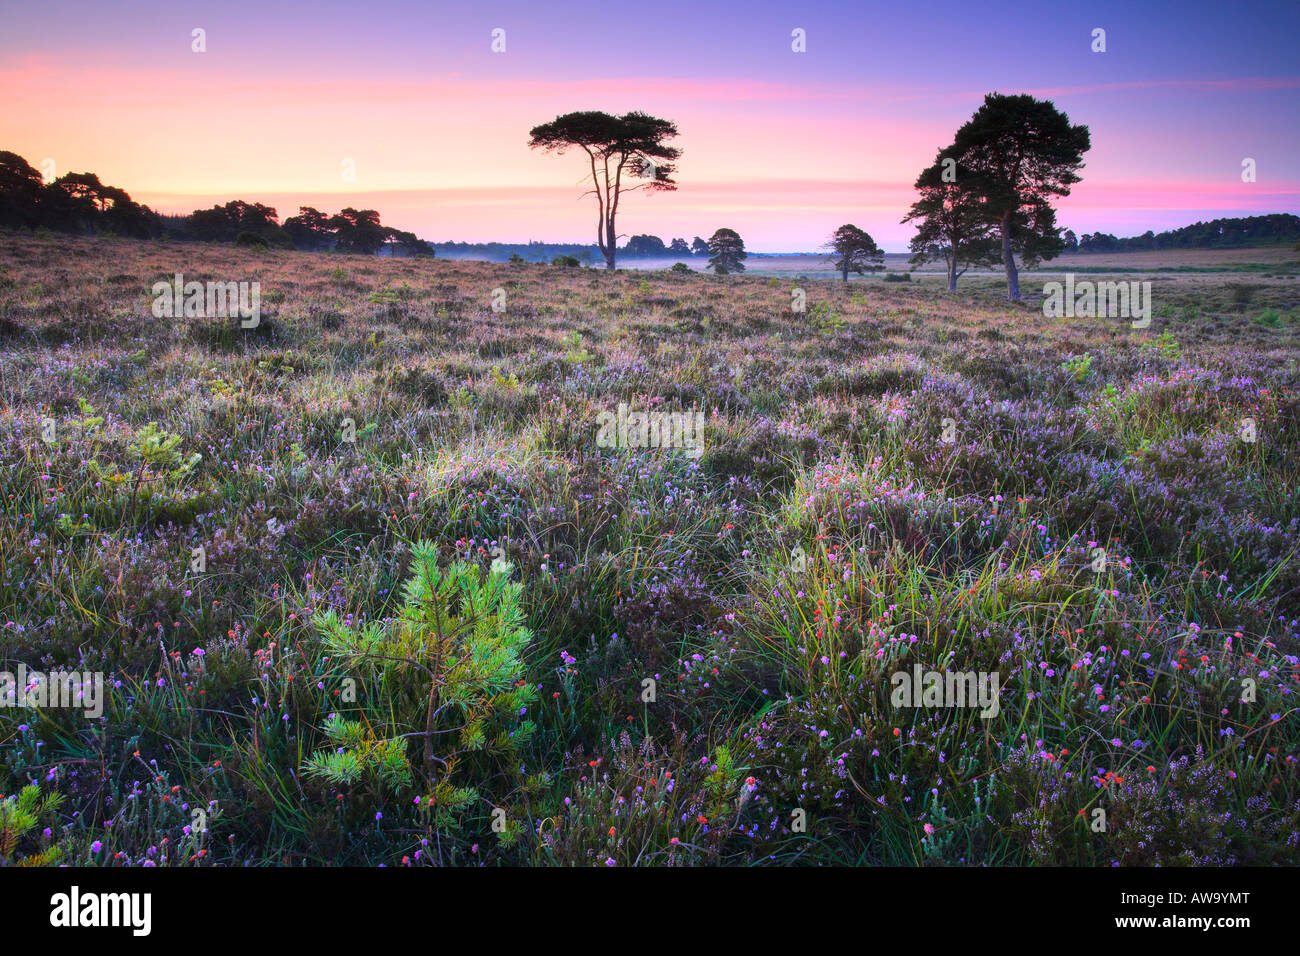 Wildflowers and pine trees on Wilverley Plain, New Forest Stock Photo